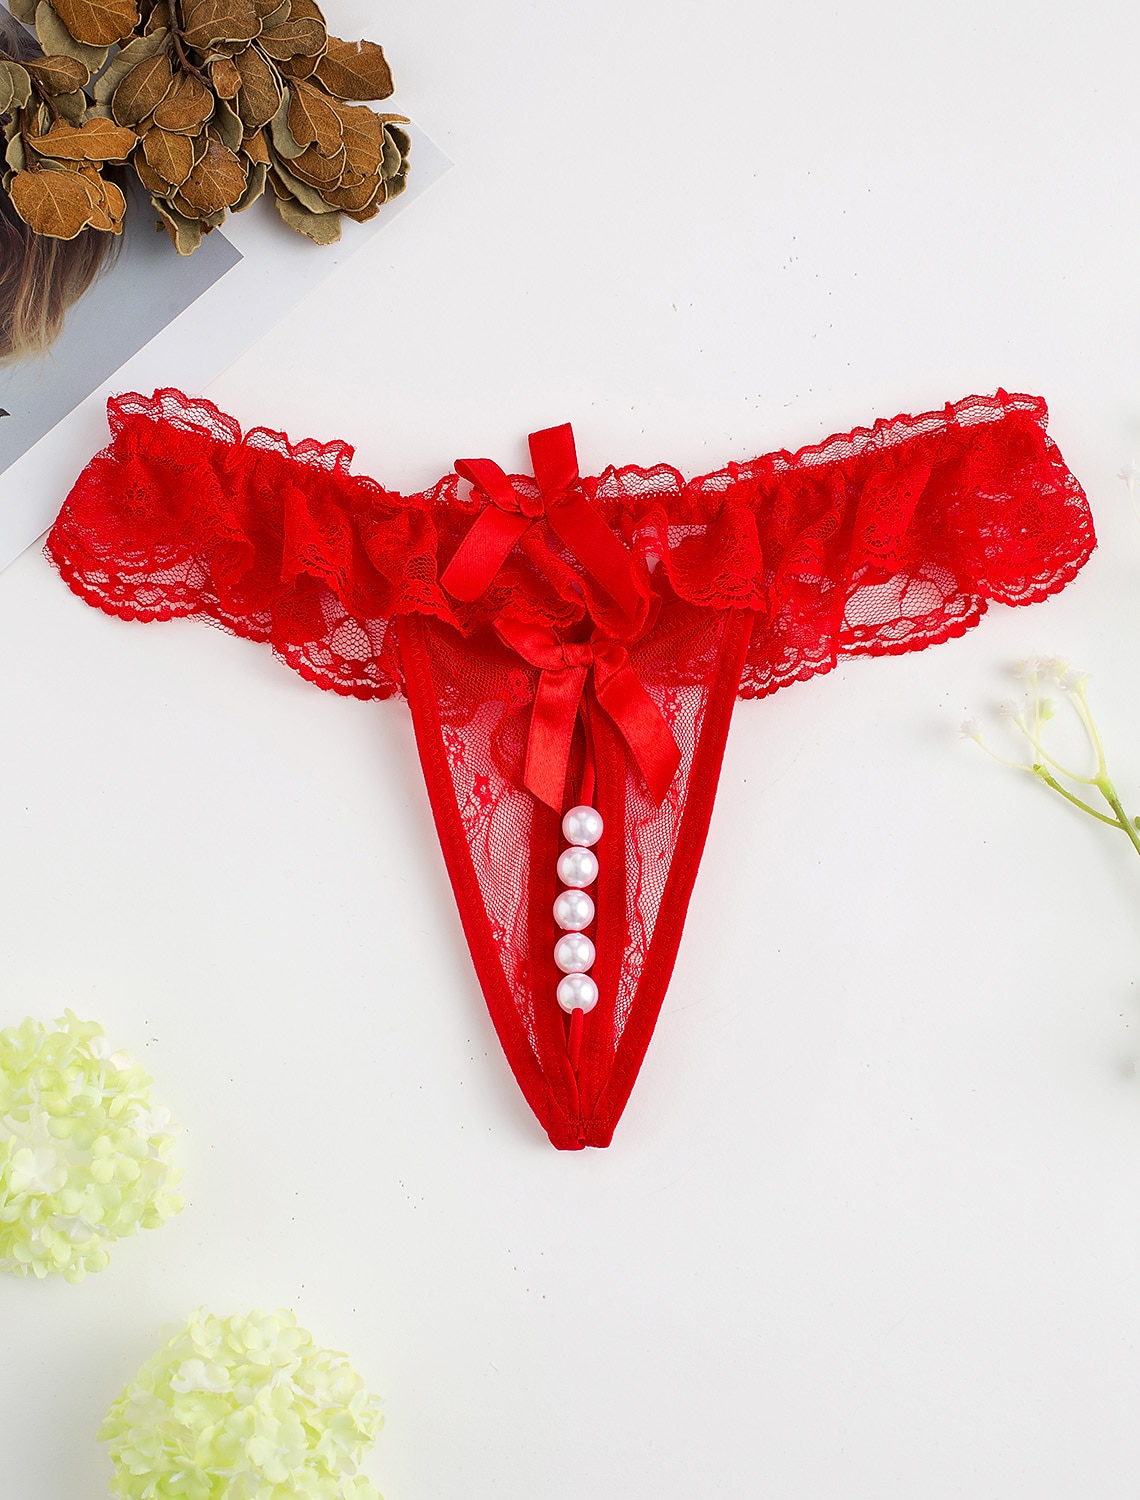 Red Sheer Roja Thong by NDS WEAR - See-Through Mesh Design